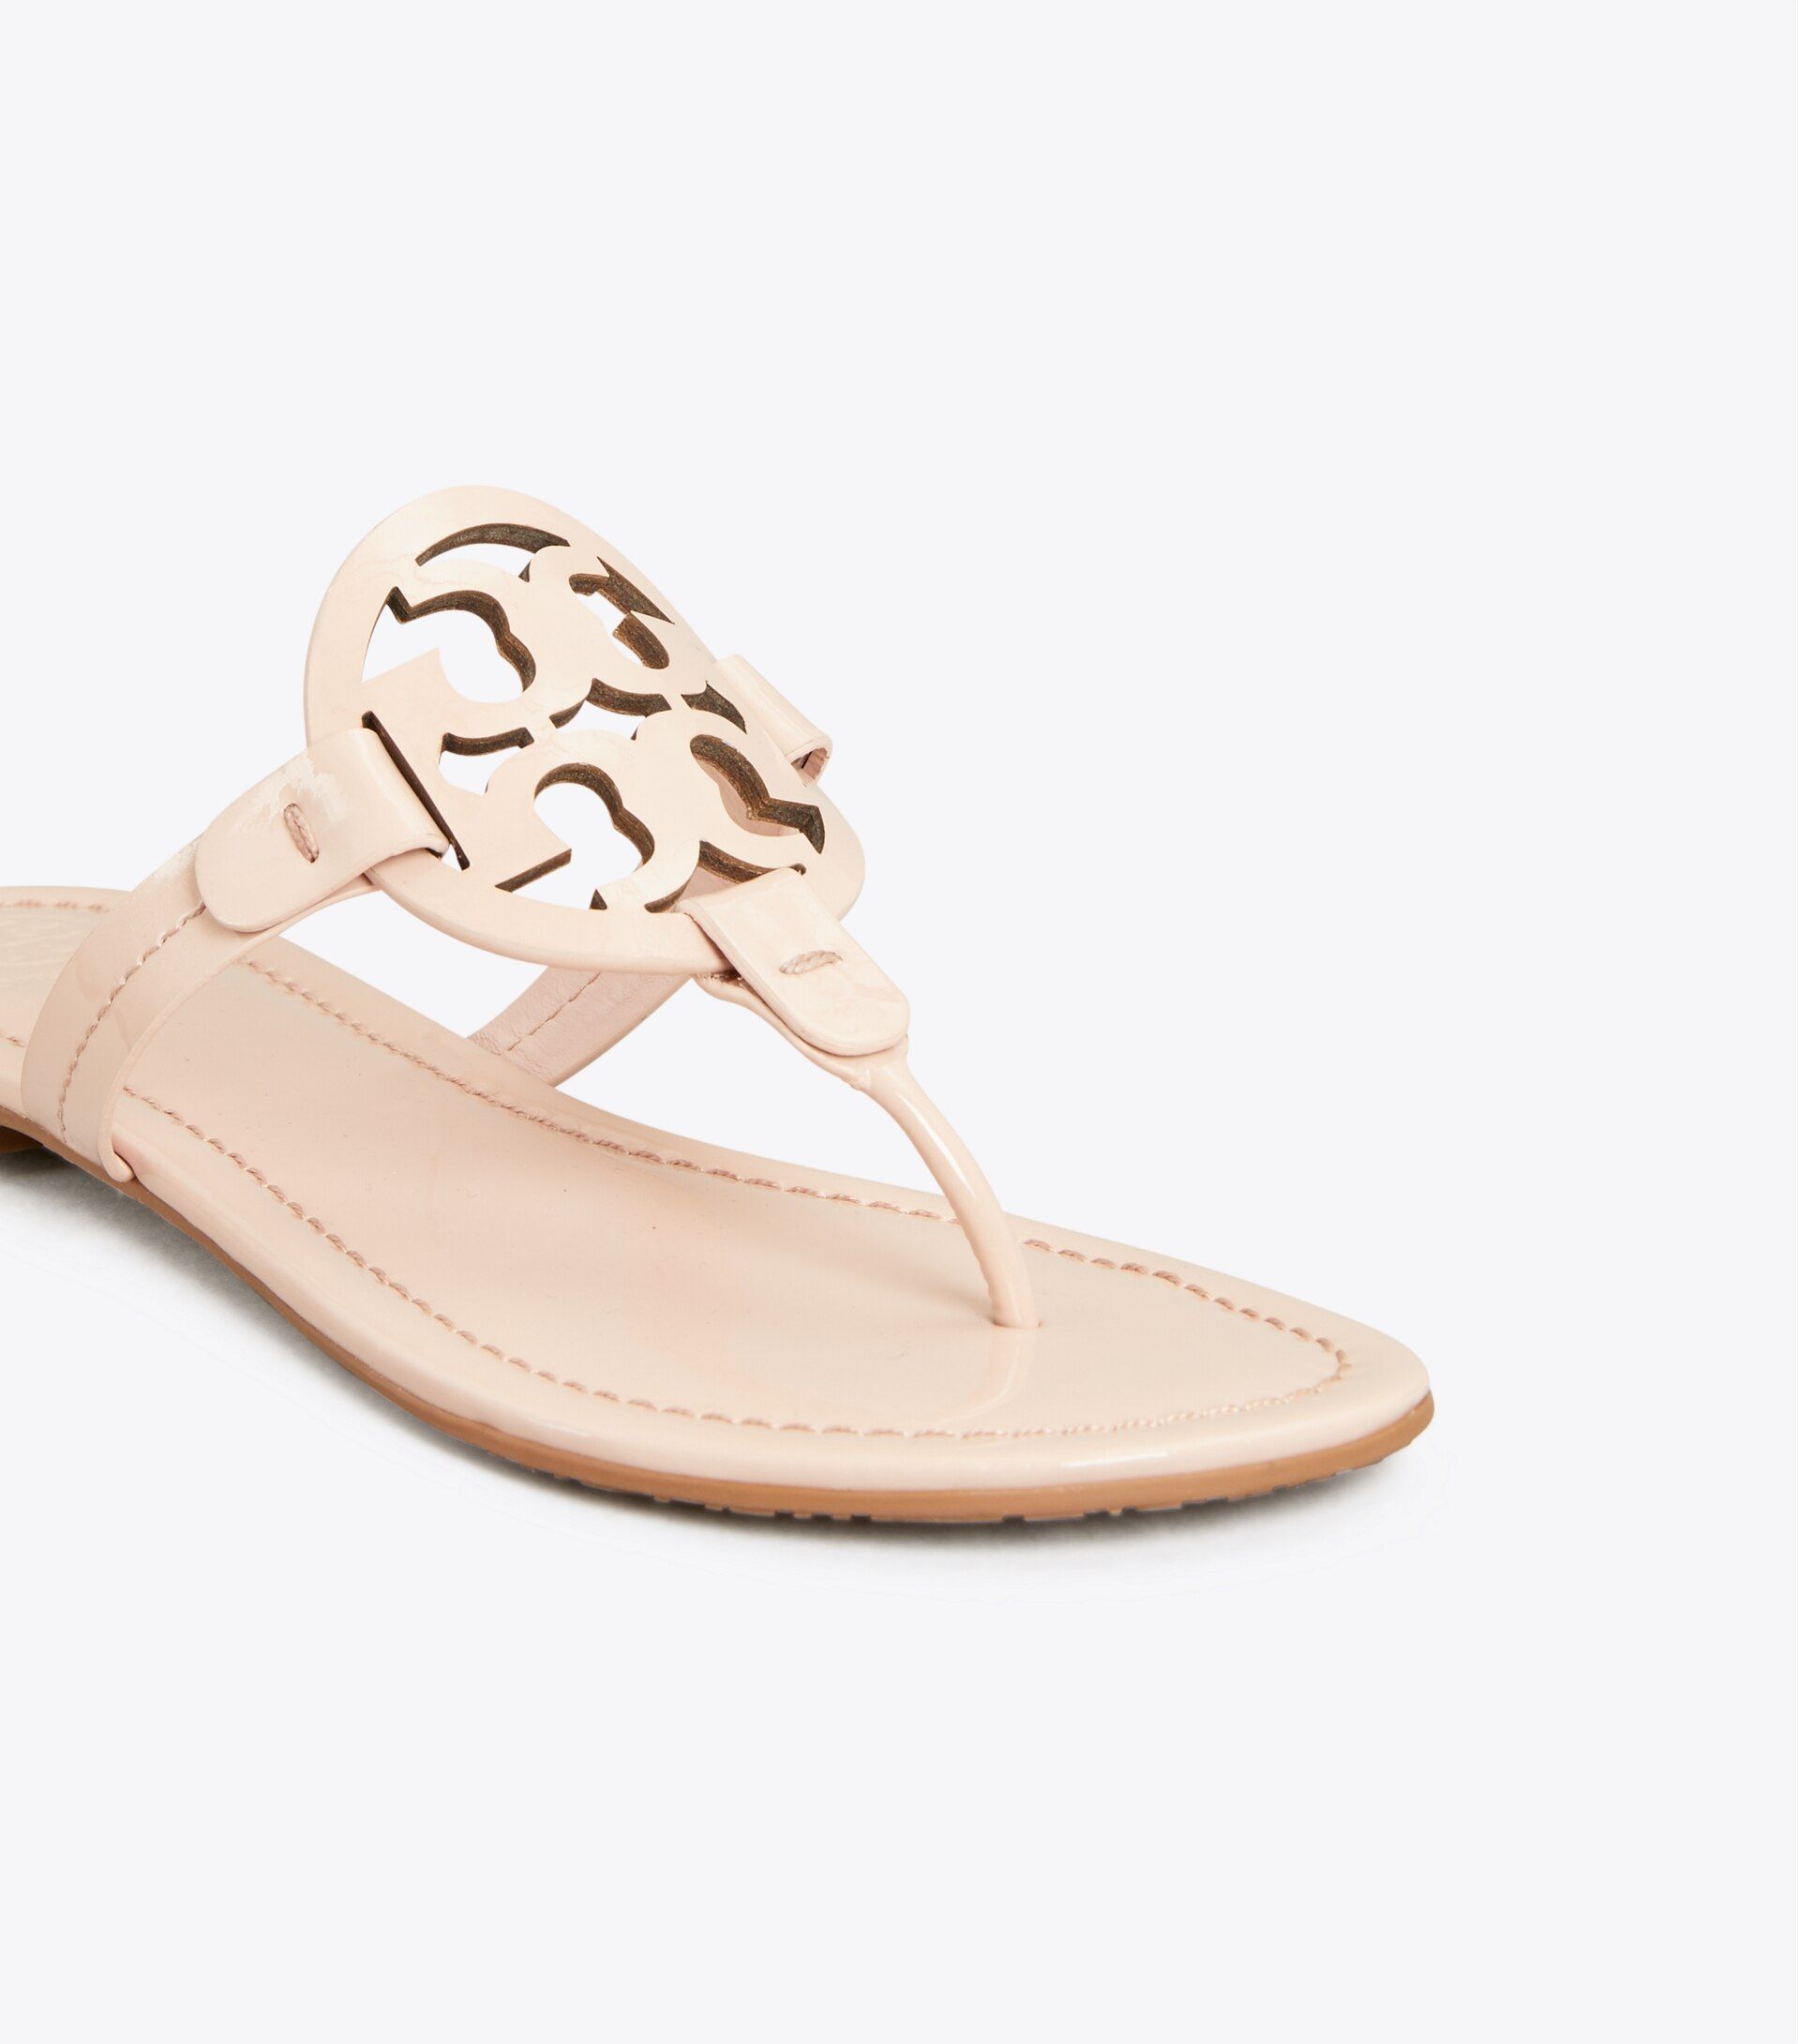 Miller Sandal, Patent Leather | Tory Burch (US)